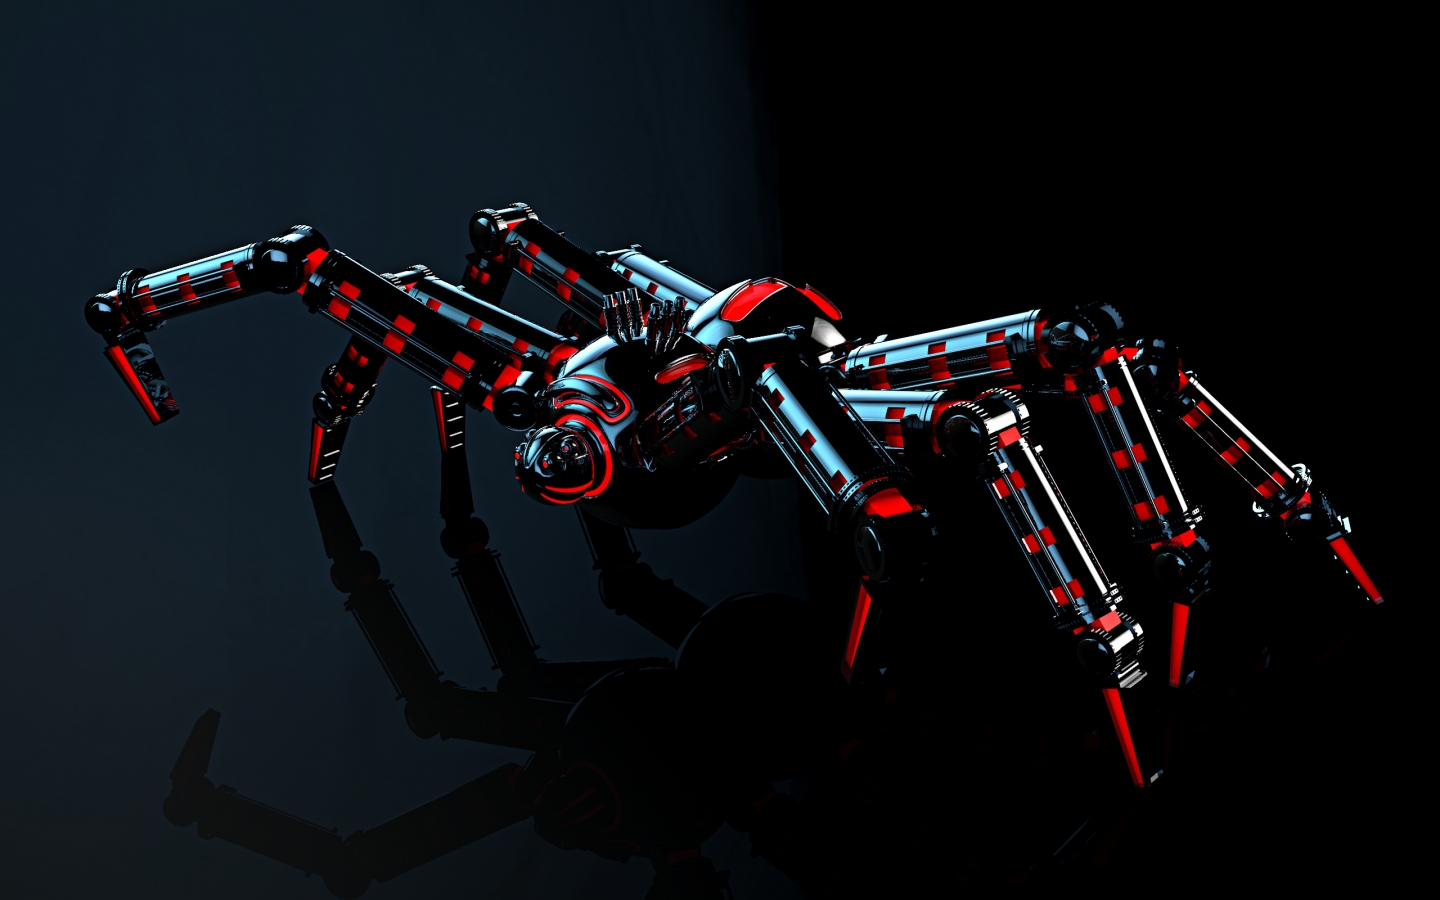 Spider Robot for 1440 x 900 widescreen resolution